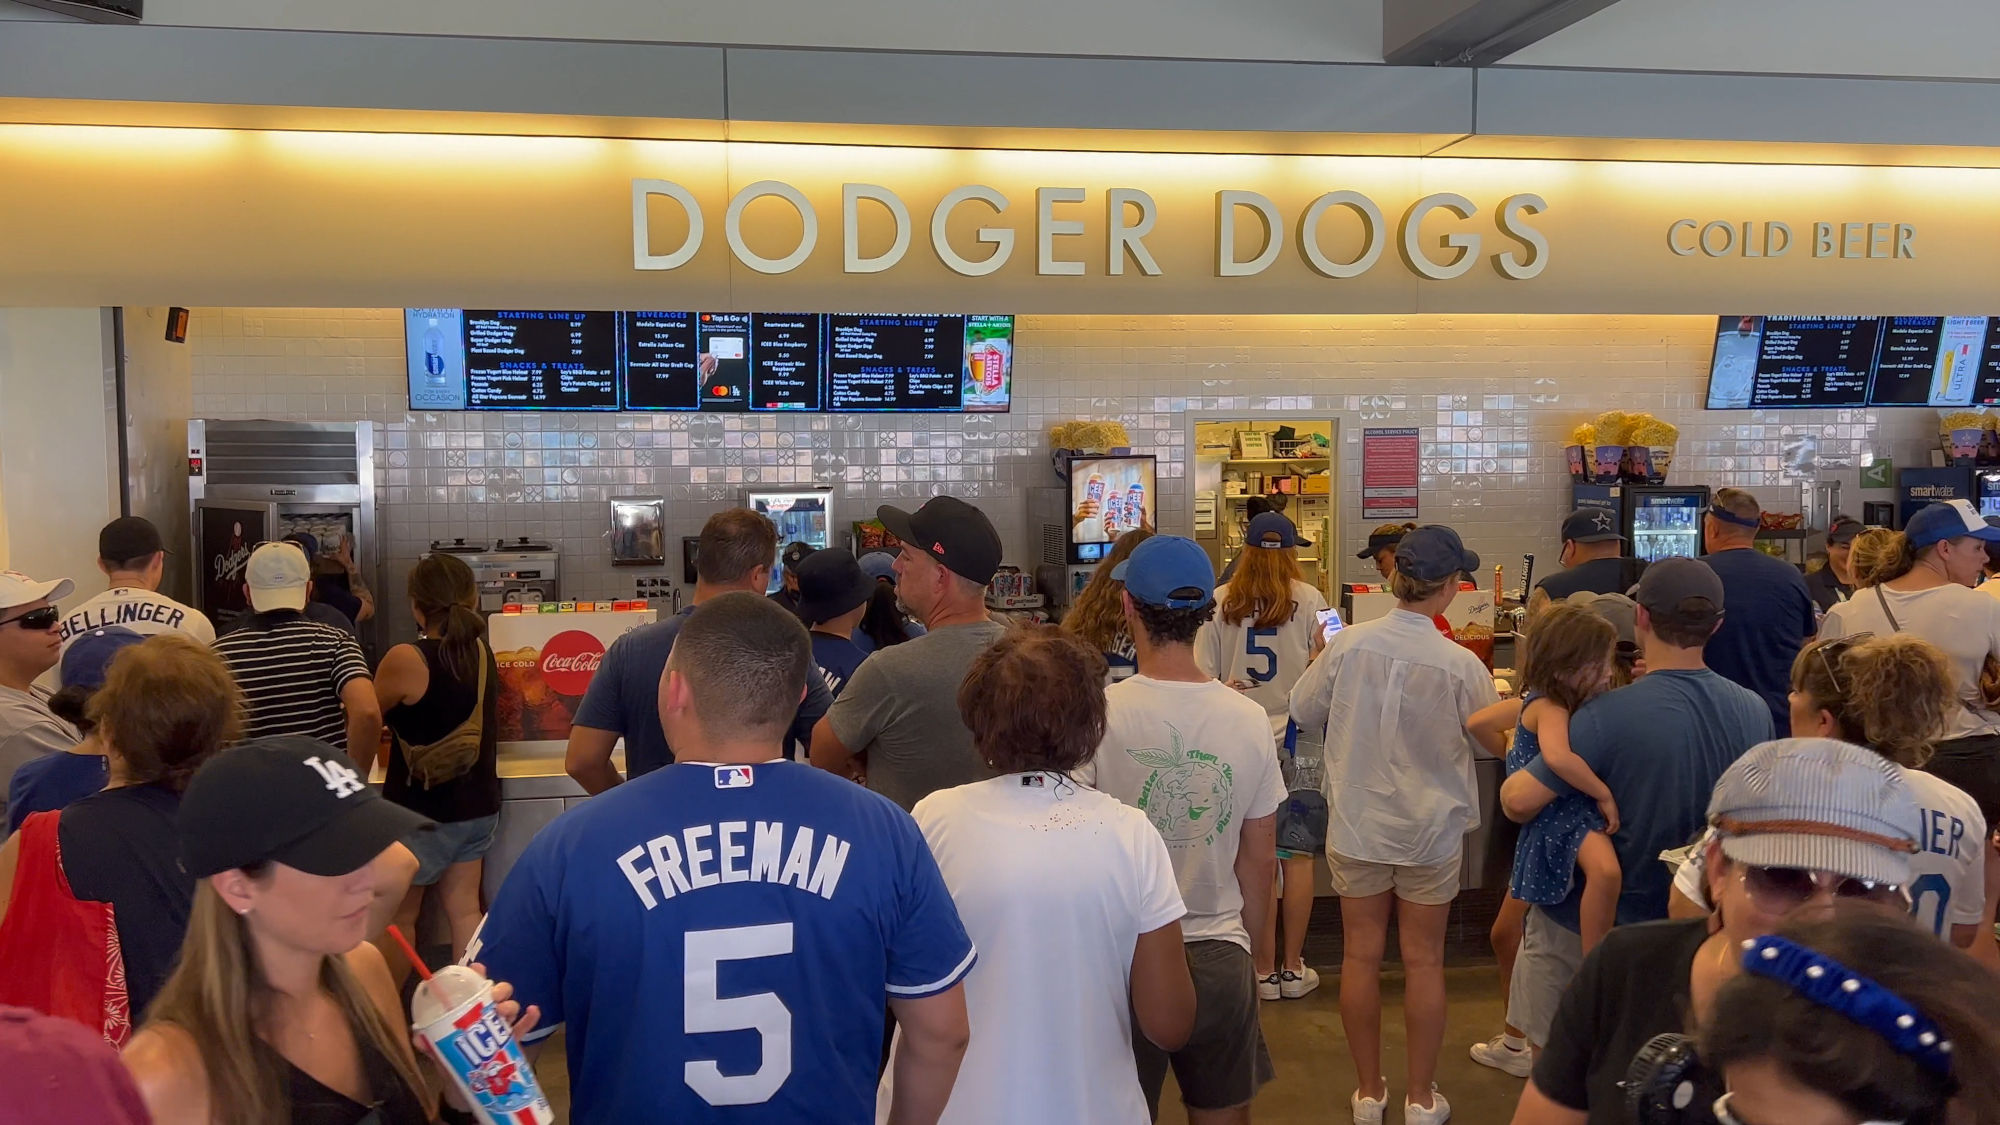 Traditional Dodger Dogs